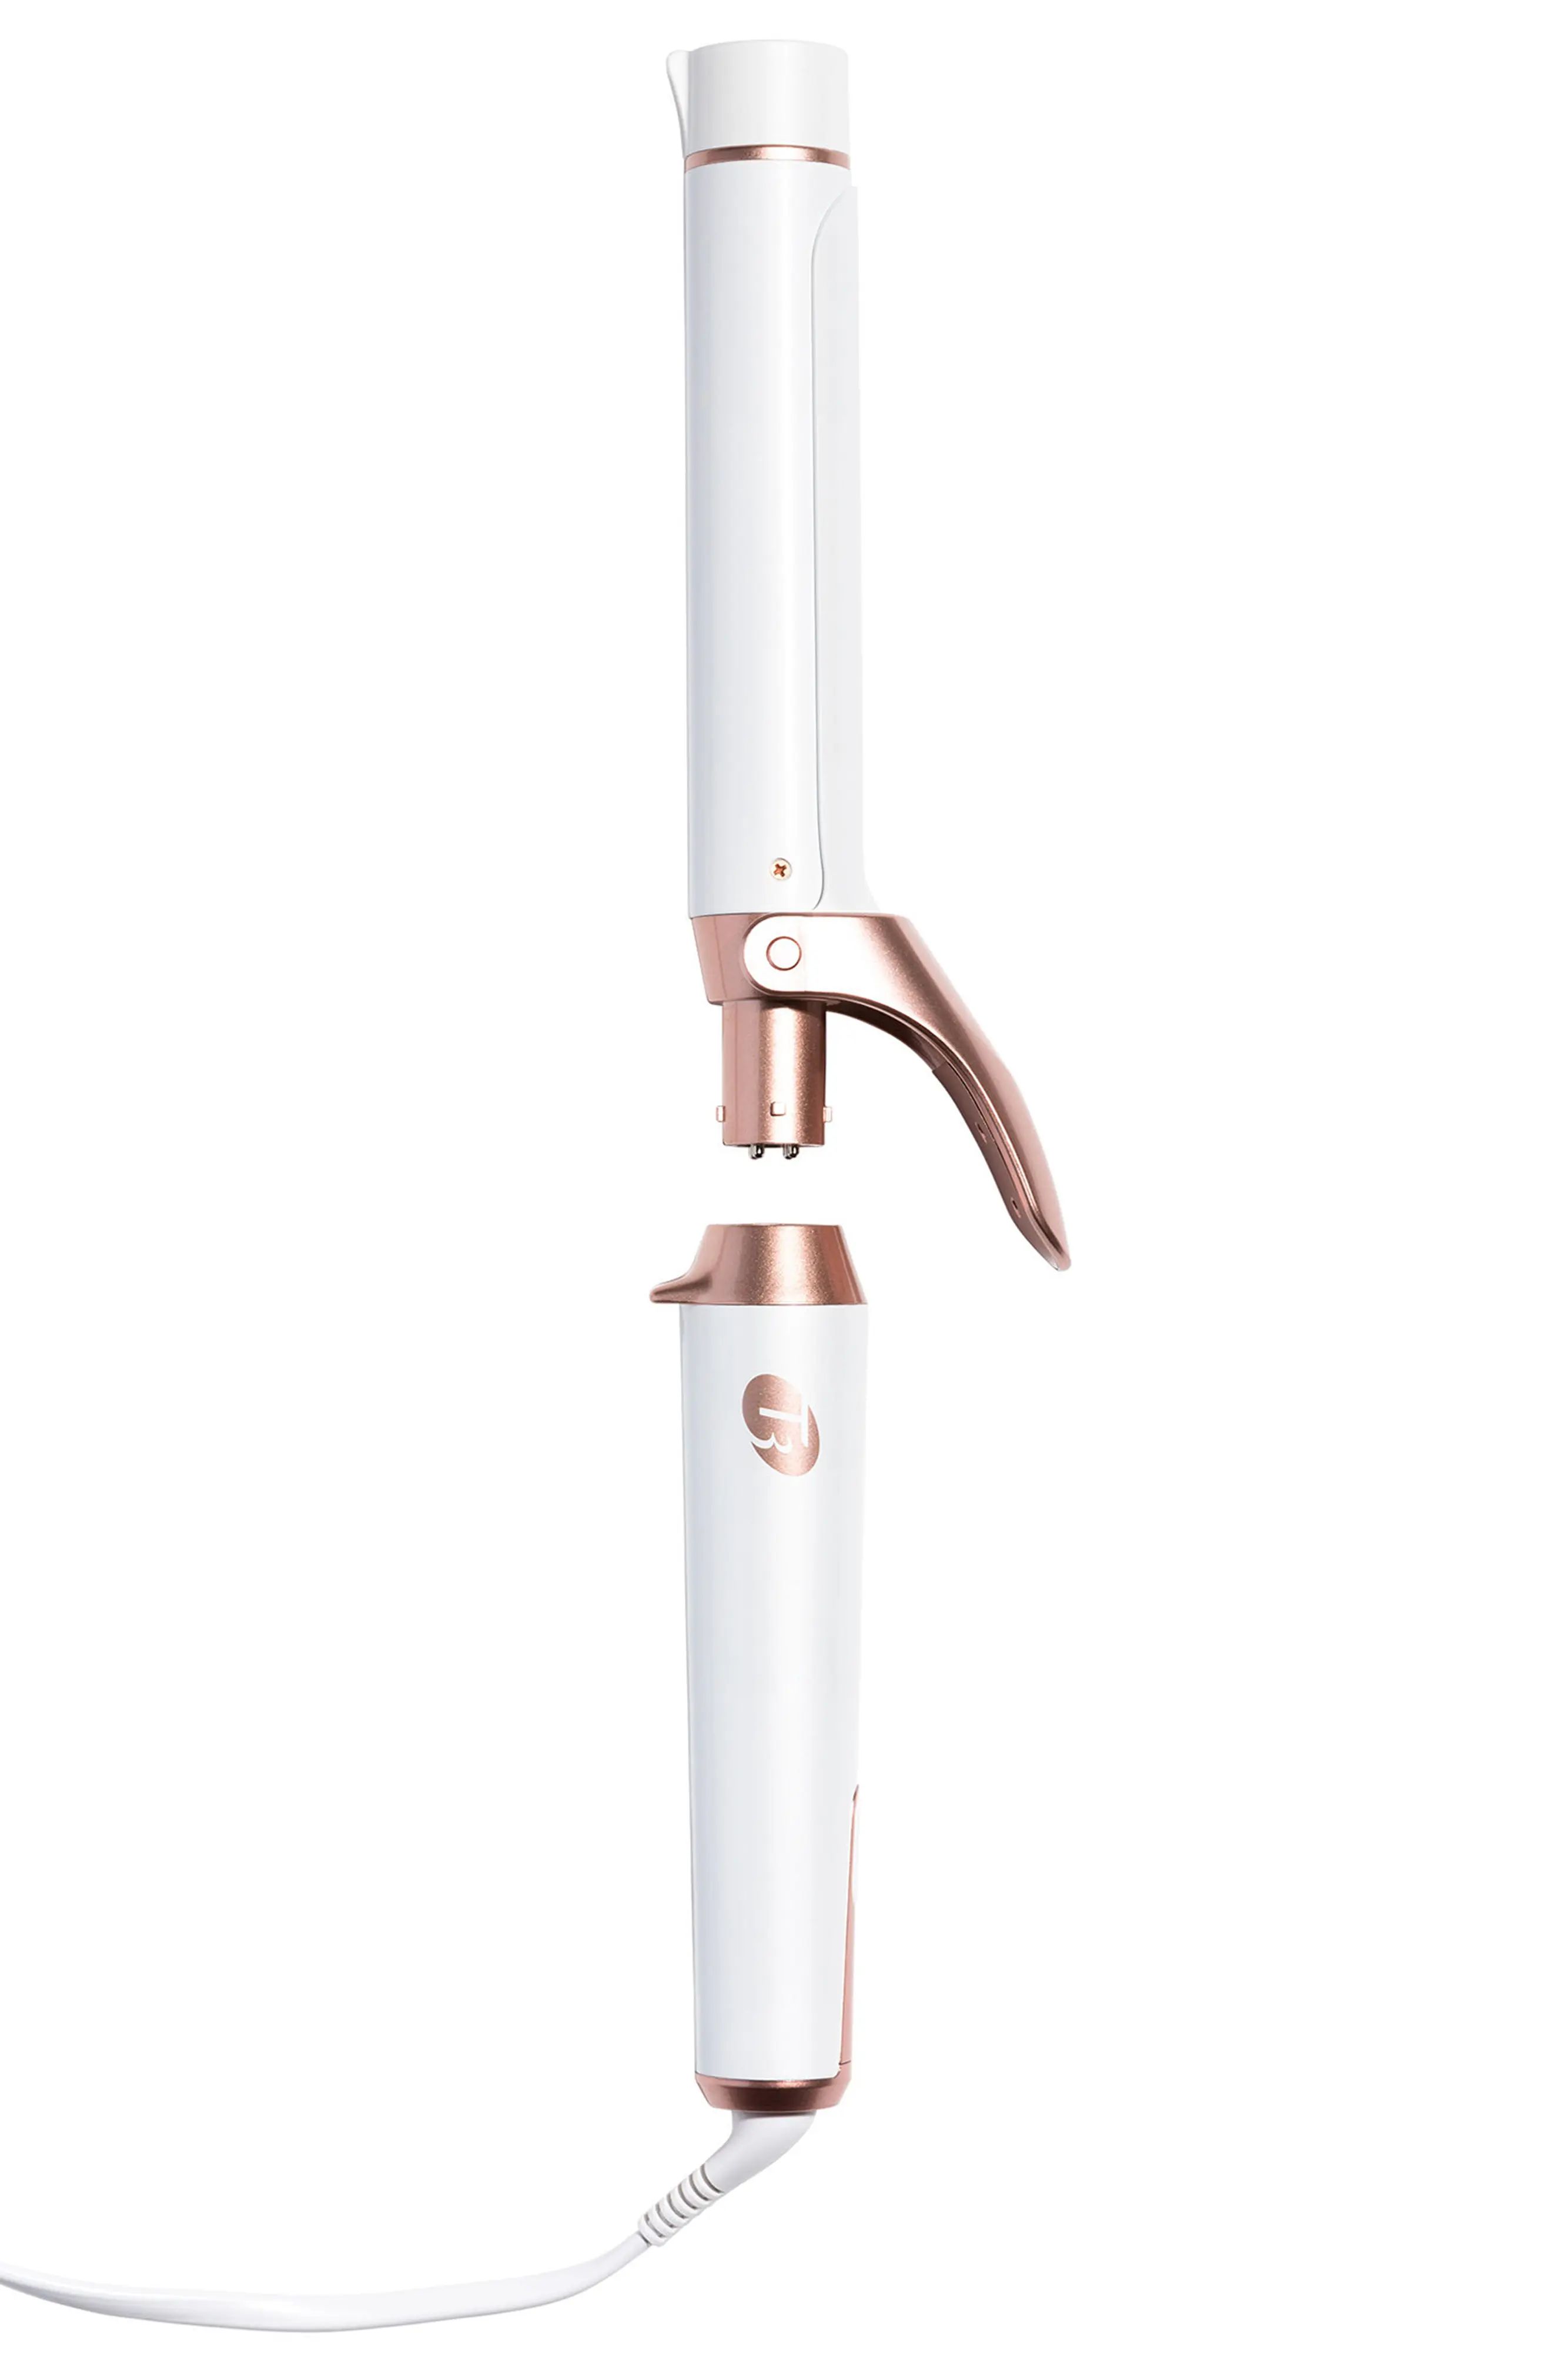 Twirl Convertible Curling Iron with 1.25 Inch Interchangeable Clip Barrel | Nordstrom